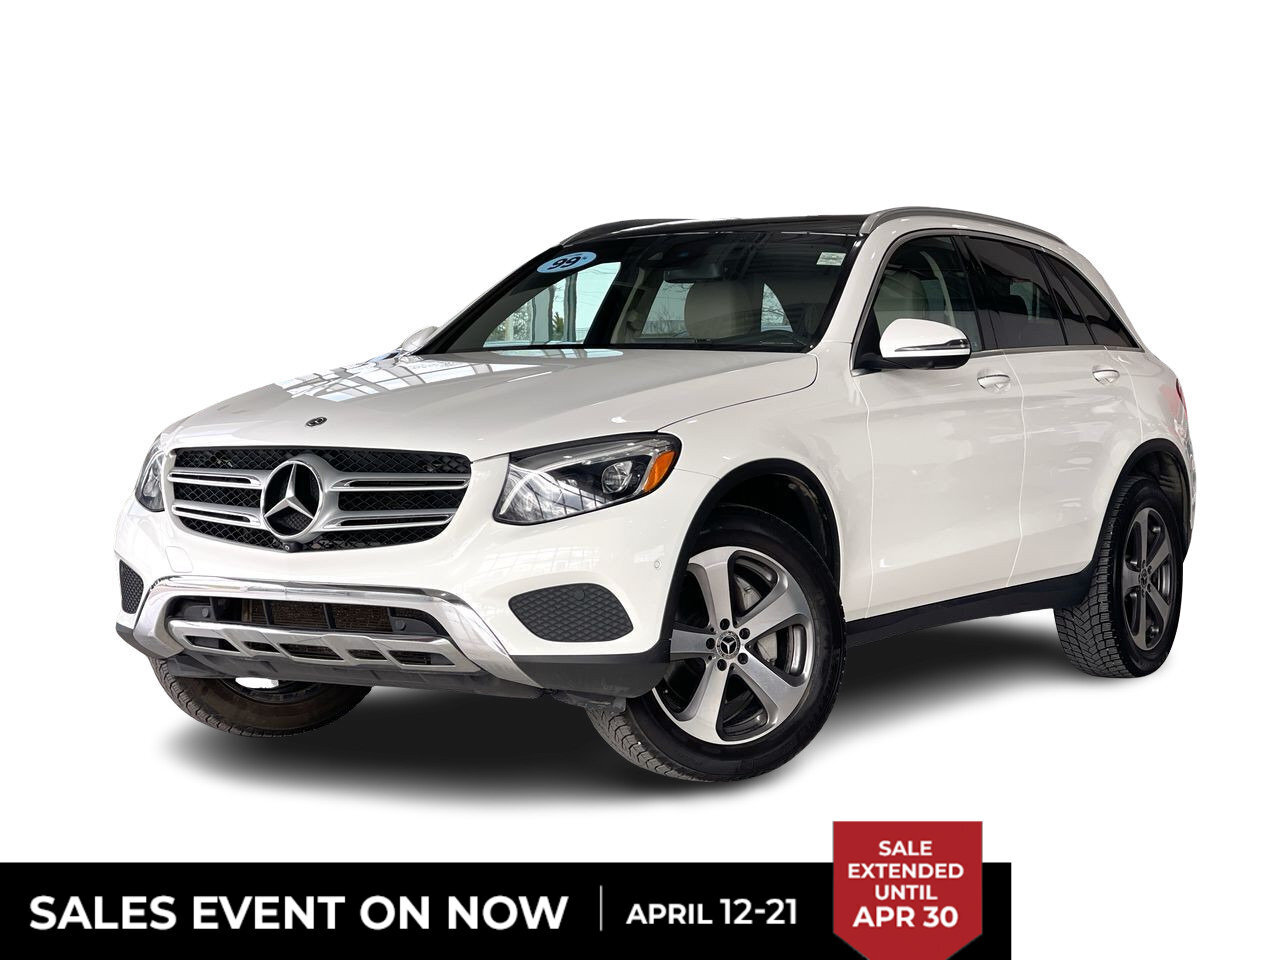 2018 Mercedes-Benz GLC300 4MATIC SUV Leather Seats/Heated Seats/Backup Camer